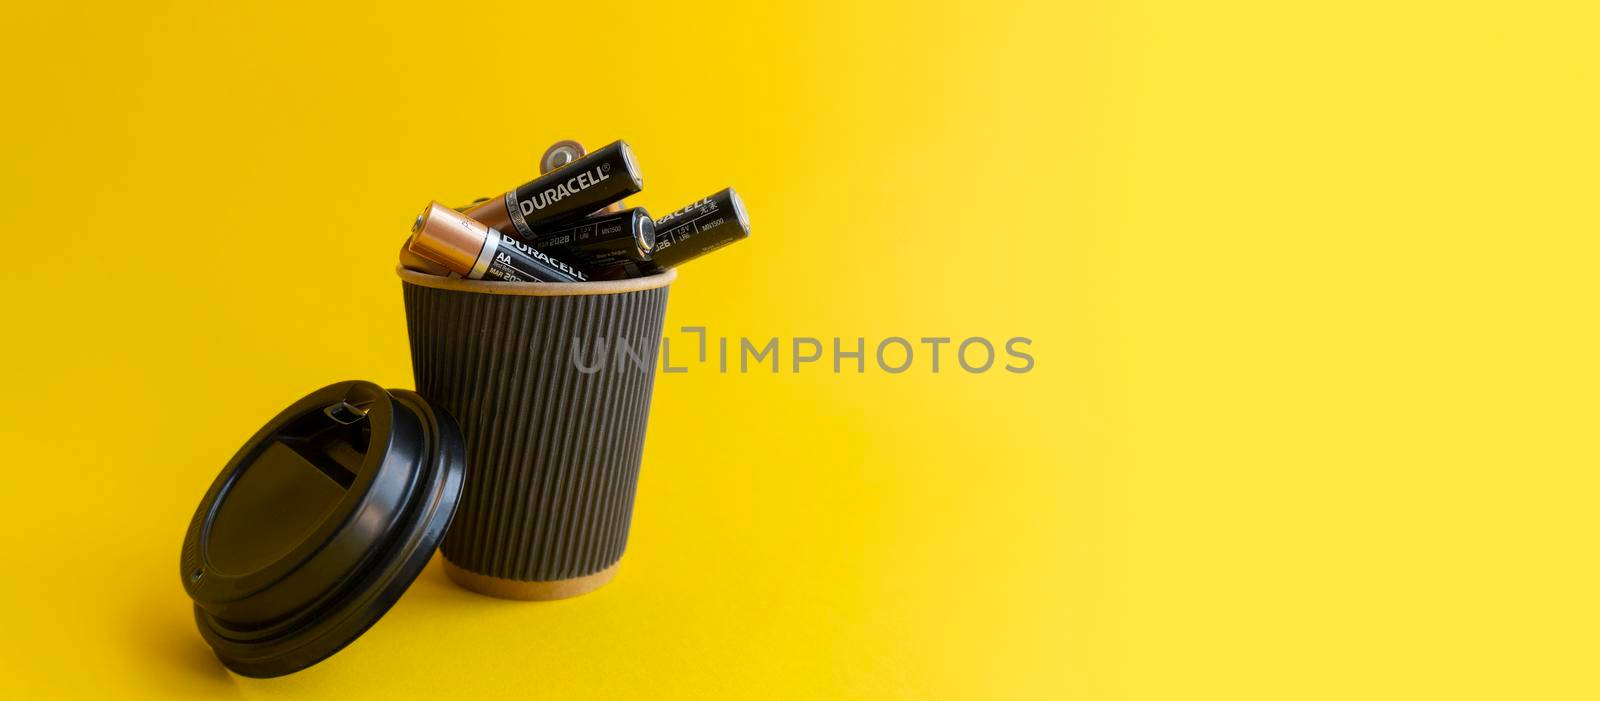 Kiev, Urkaine, 16 June 2020, Duracell AA alkaline batteries are in coffee takeaway cup as association of energy, yellow background, creative idea of using batteries. Enough space for text.